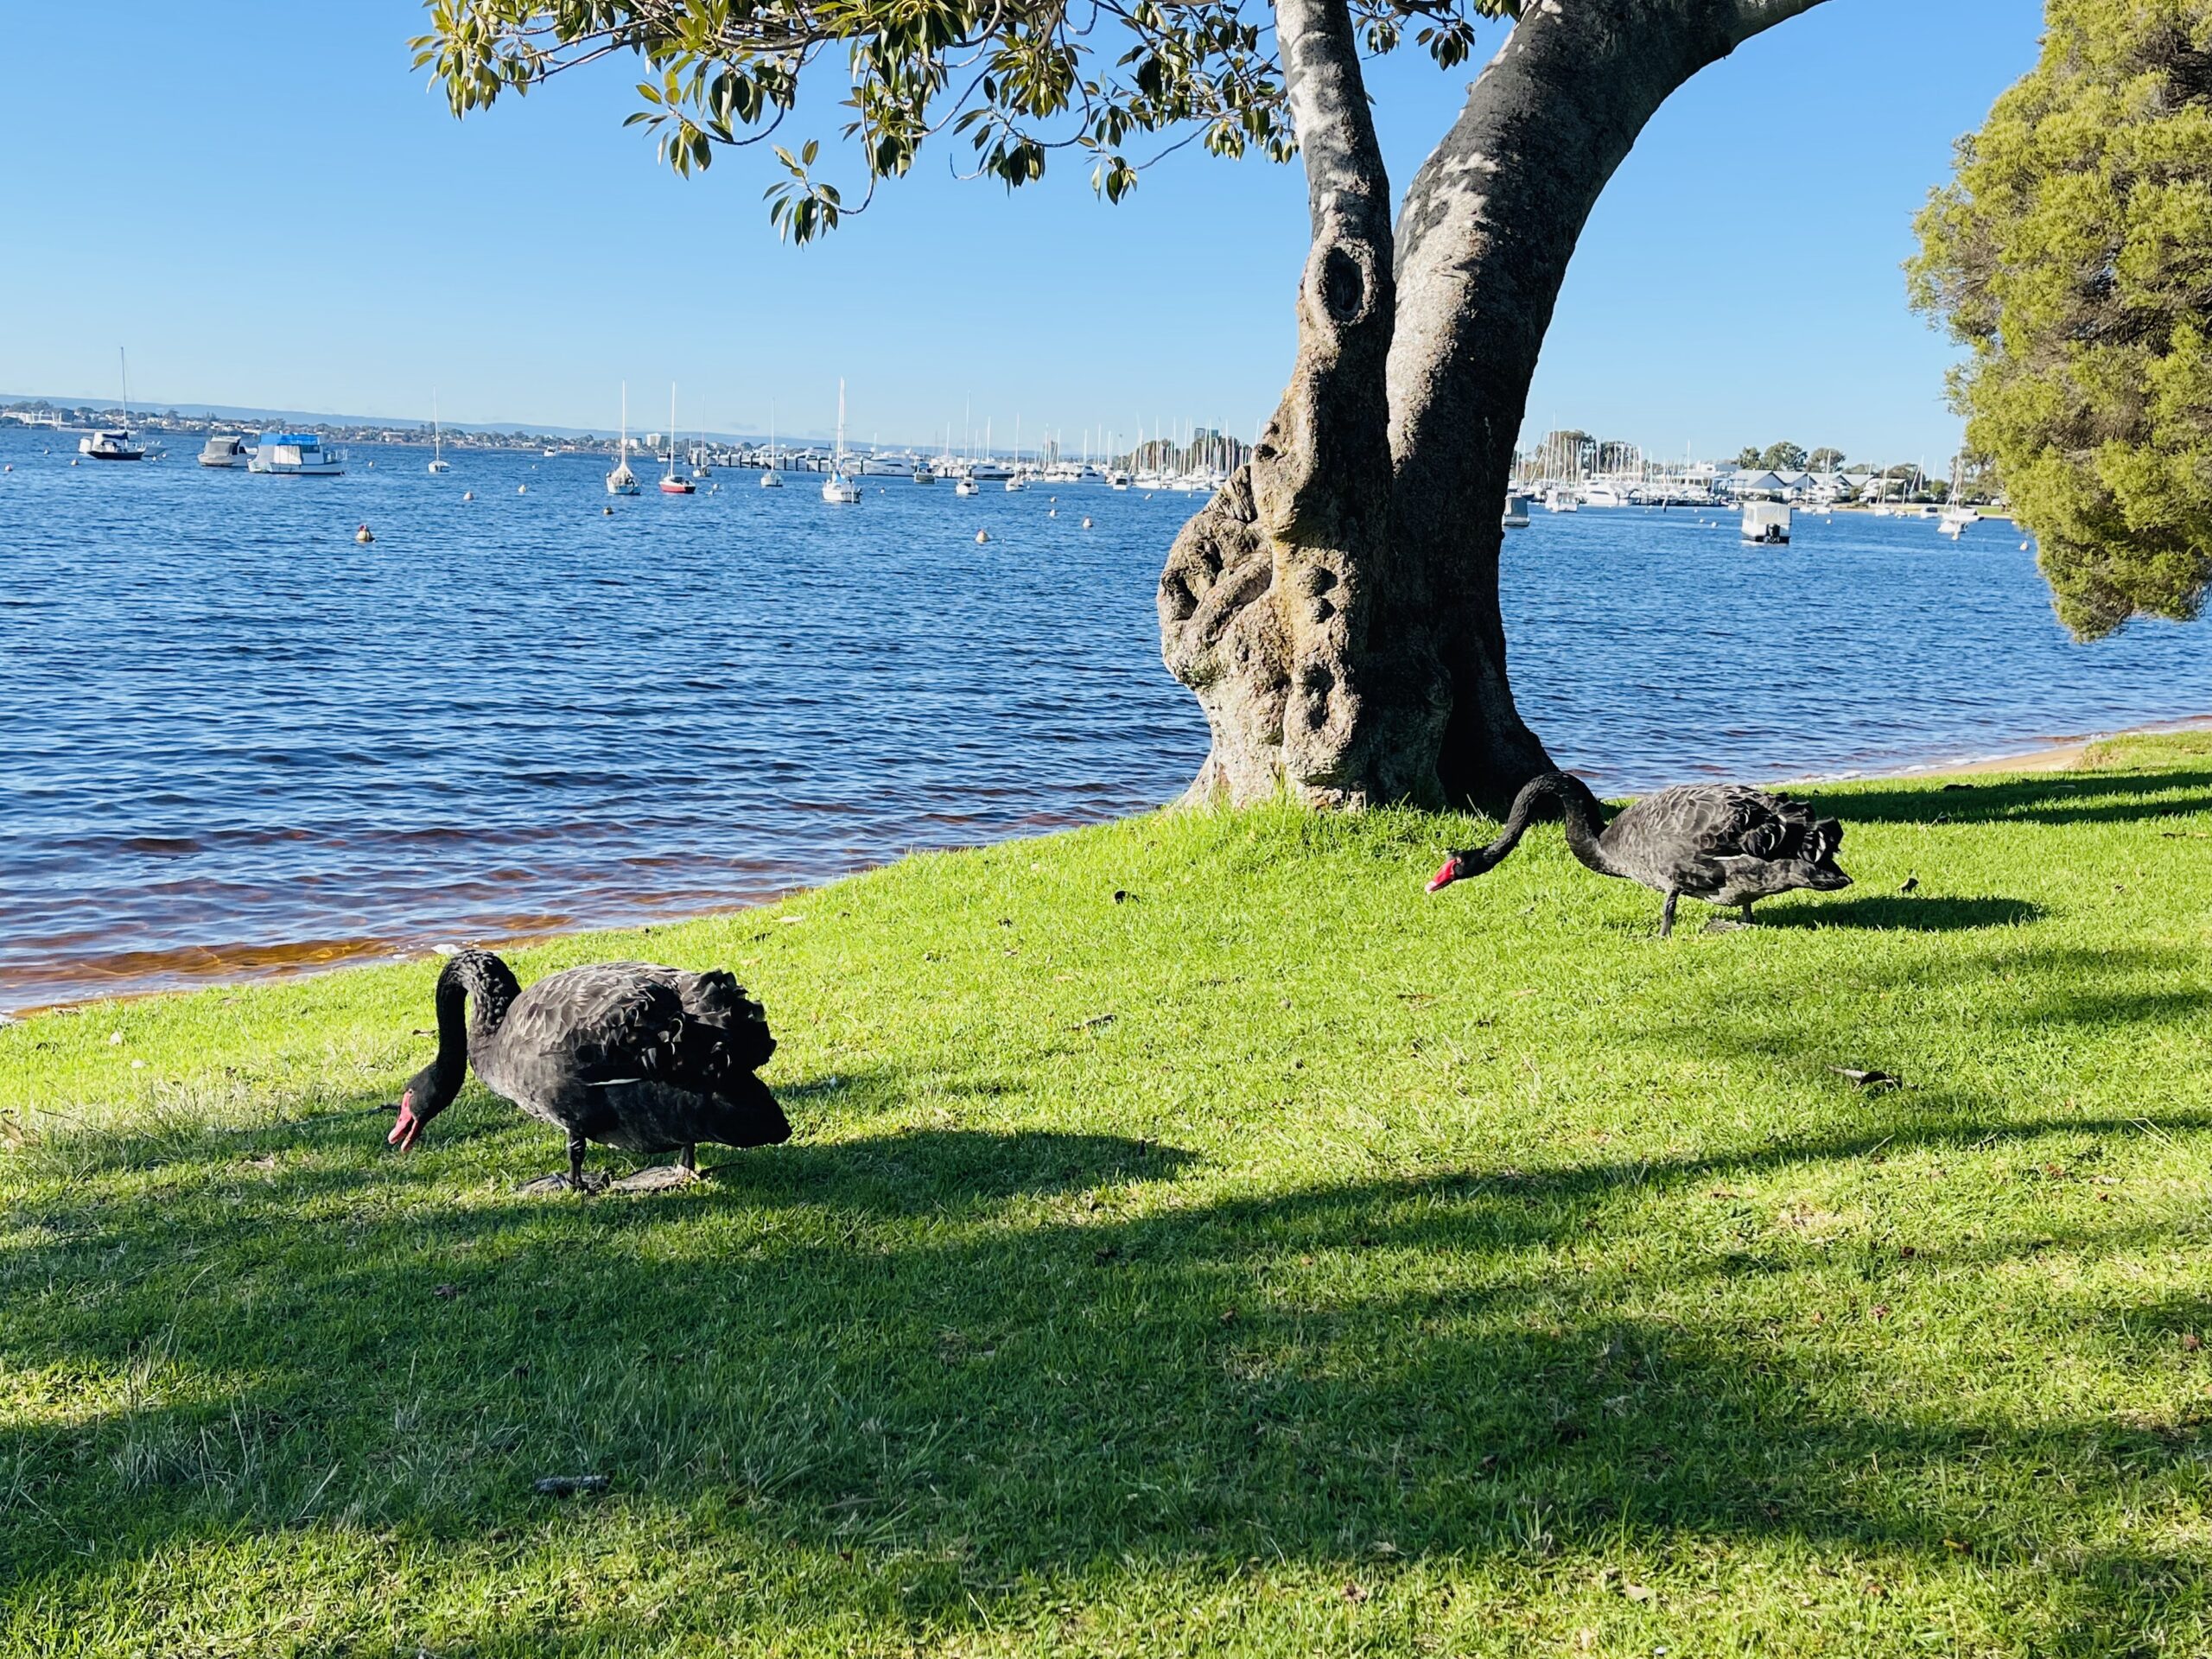 A photo of two black swans pecking at the green grass on the banks of the Swan River. The birds have large, round bodies, long, thin necks, and bright red beaks. The sky above is bright blue, and the river in the background reflects this.